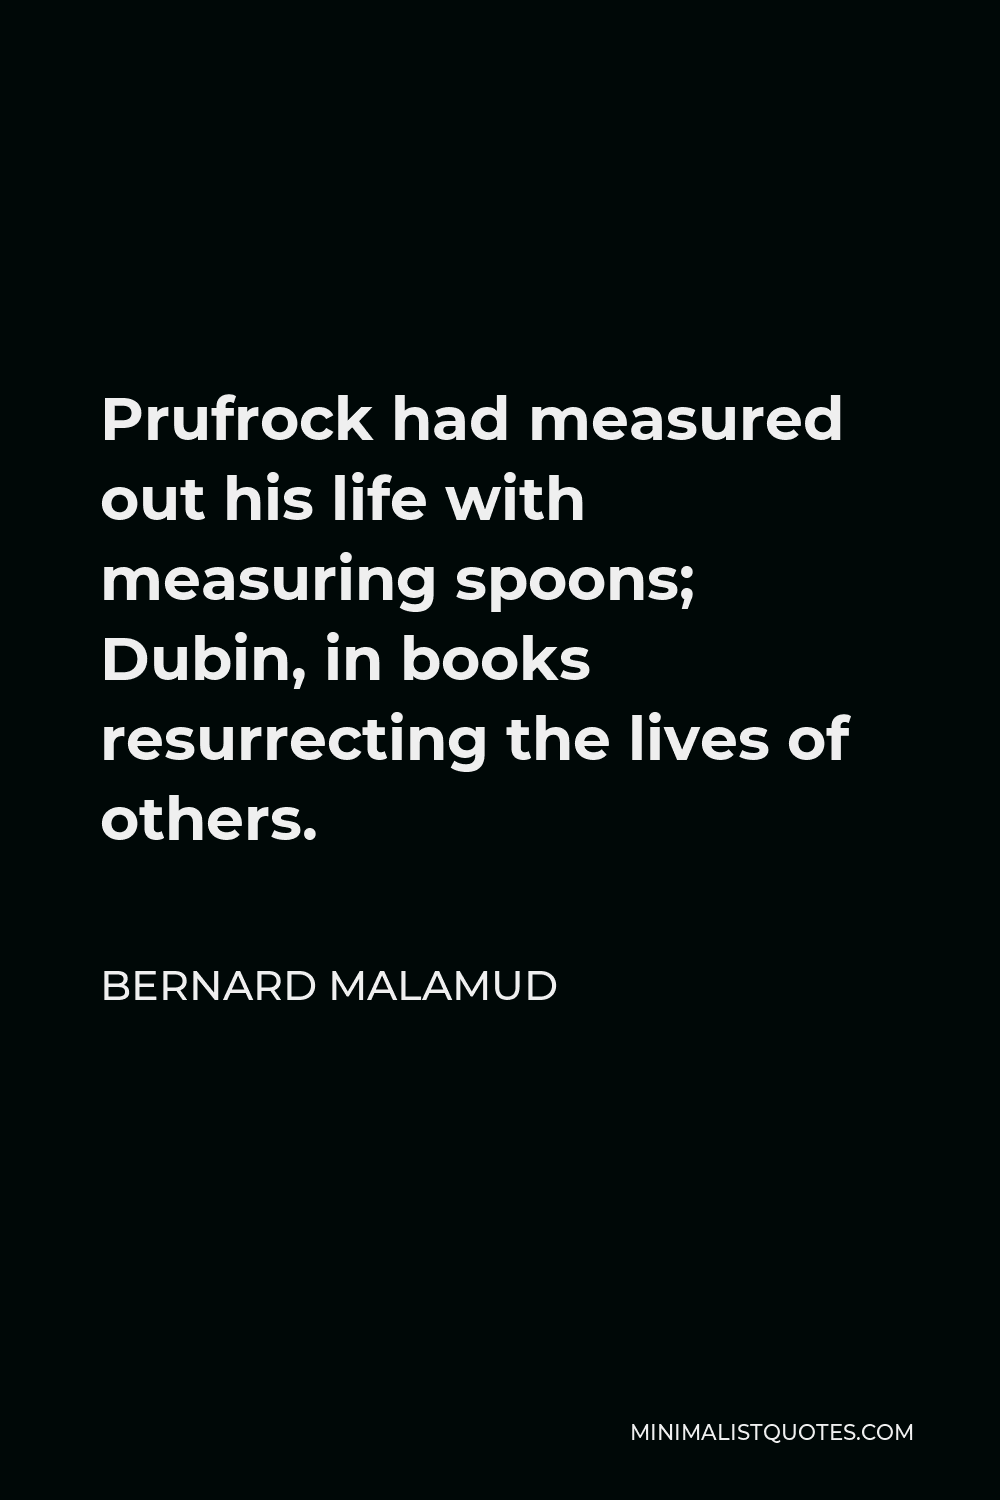 Bernard Malamud Quote - Prufrock had measured out his life with measuring spoons; Dubin, in books resurrecting the lives of others.